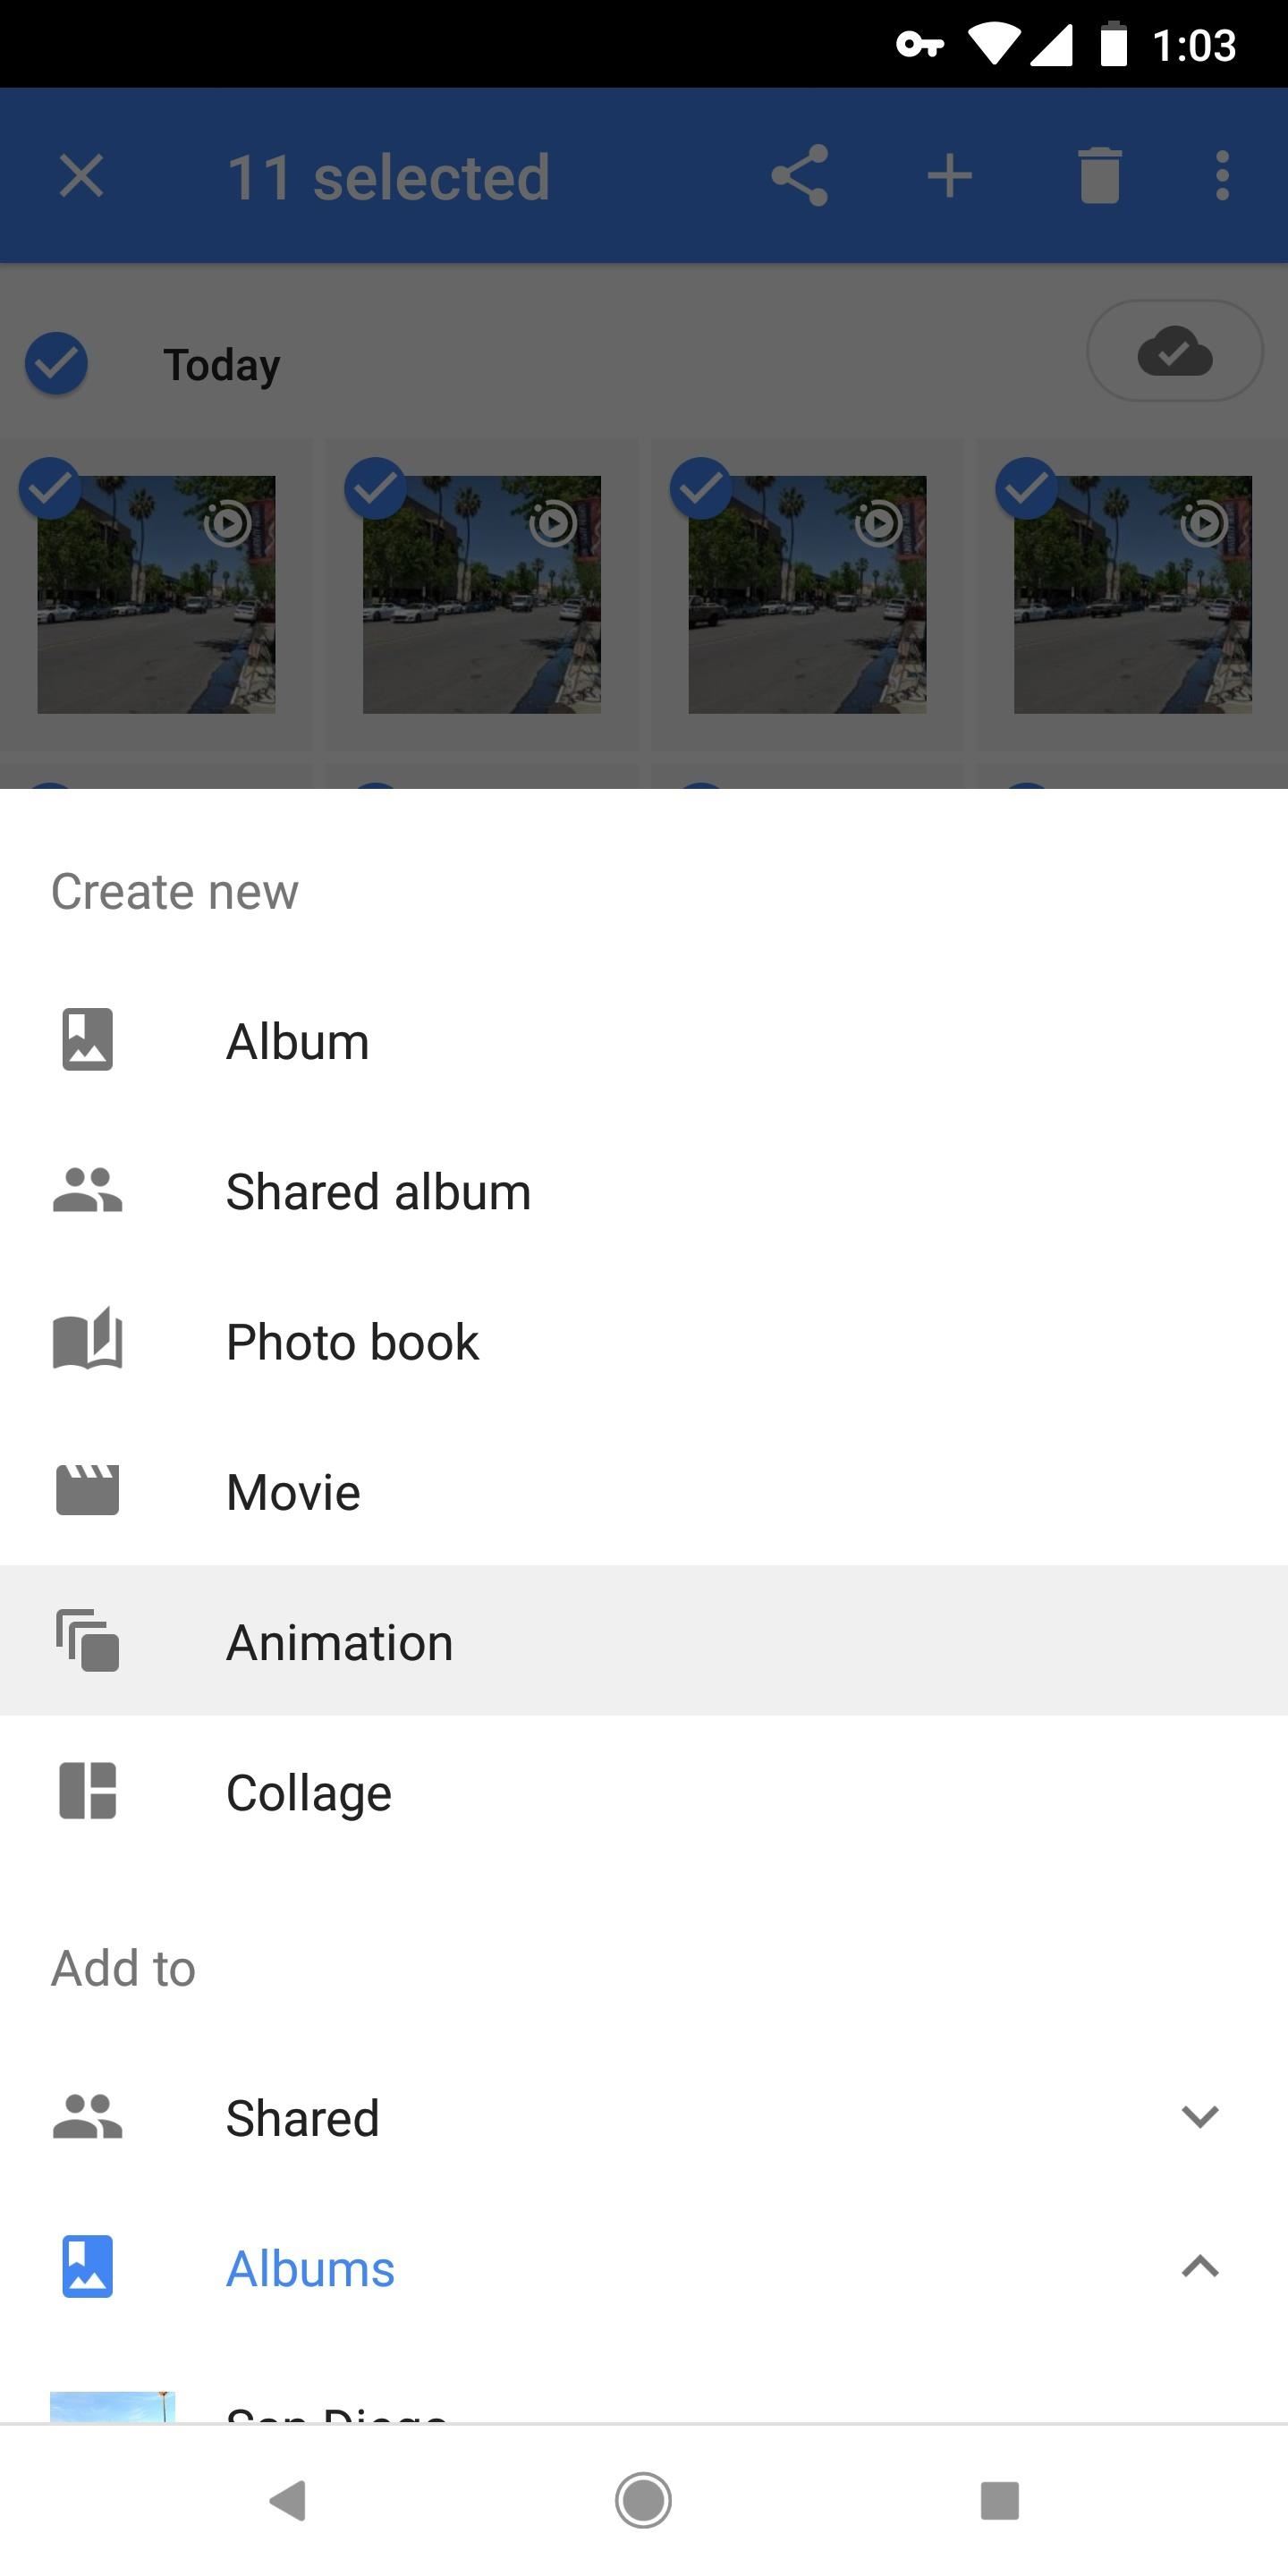 Google Photos 101: How to Make Your Own GIFs Out of Pictures You've Taken